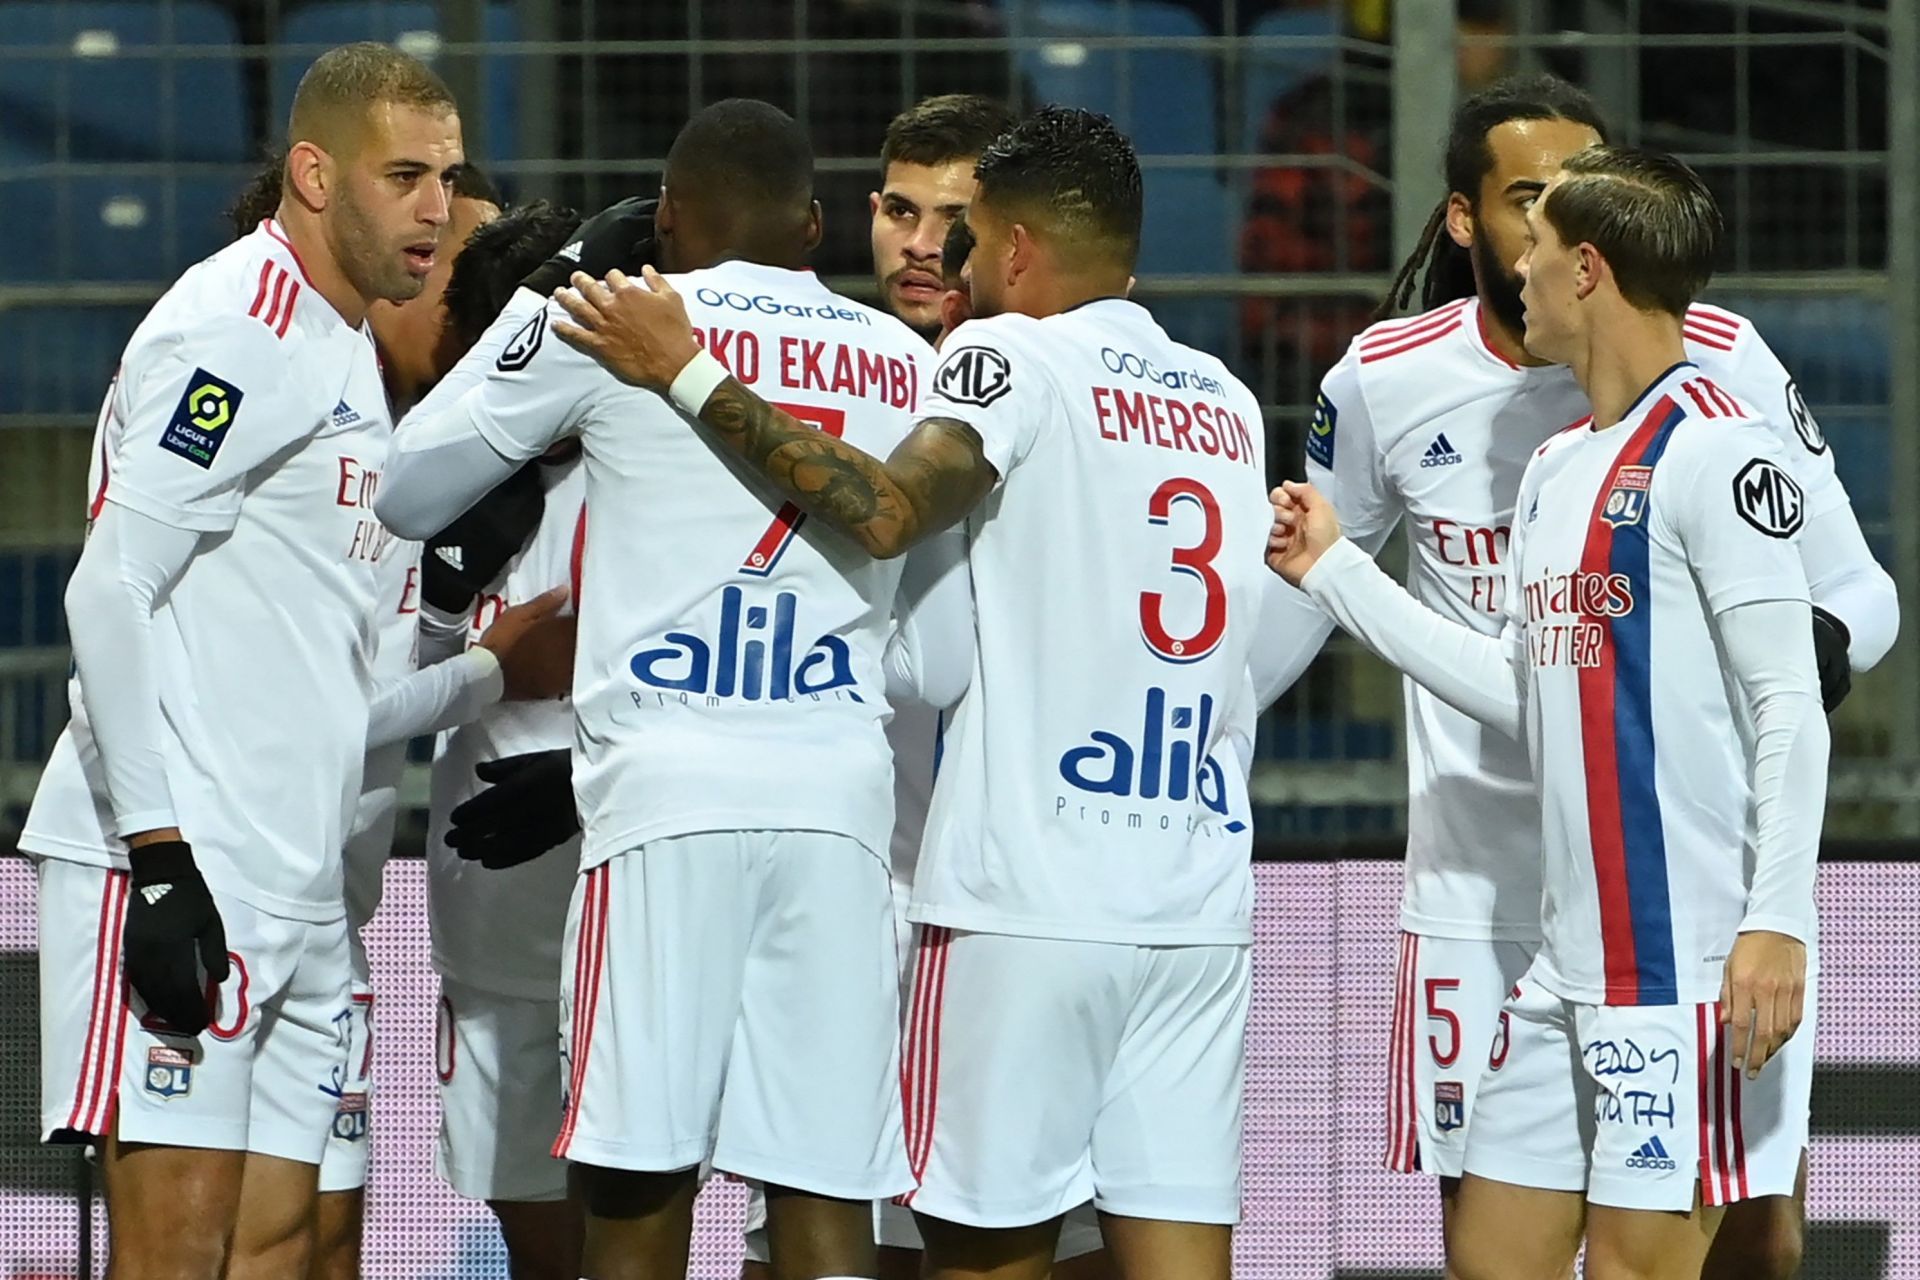 Can Lyon get back on the winning track against struggling Bordeaux this weekend?